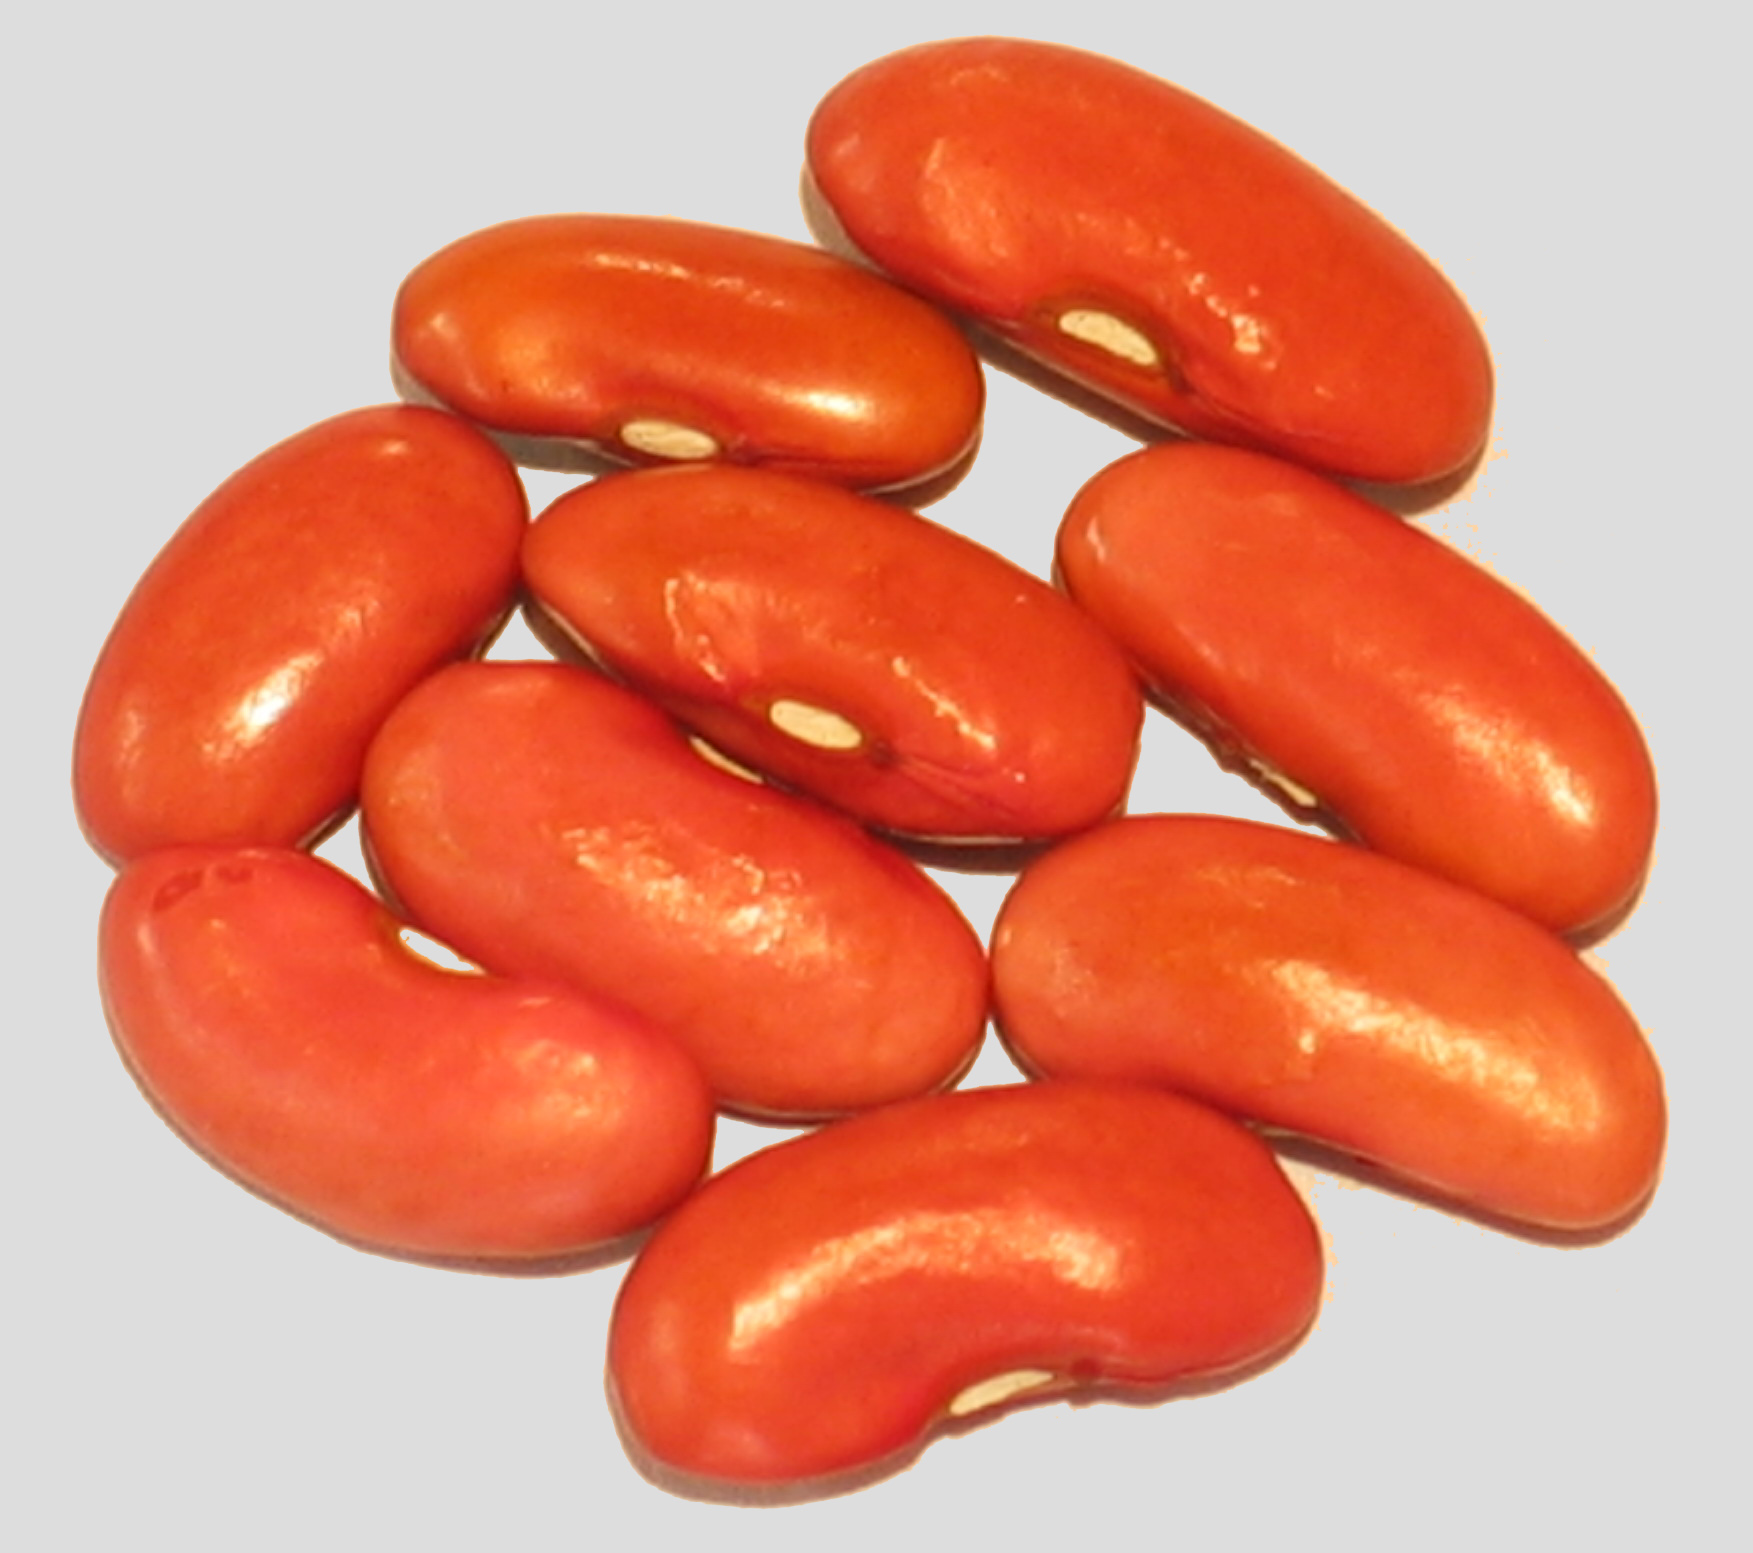 image of Louisiana Red Kidney beans